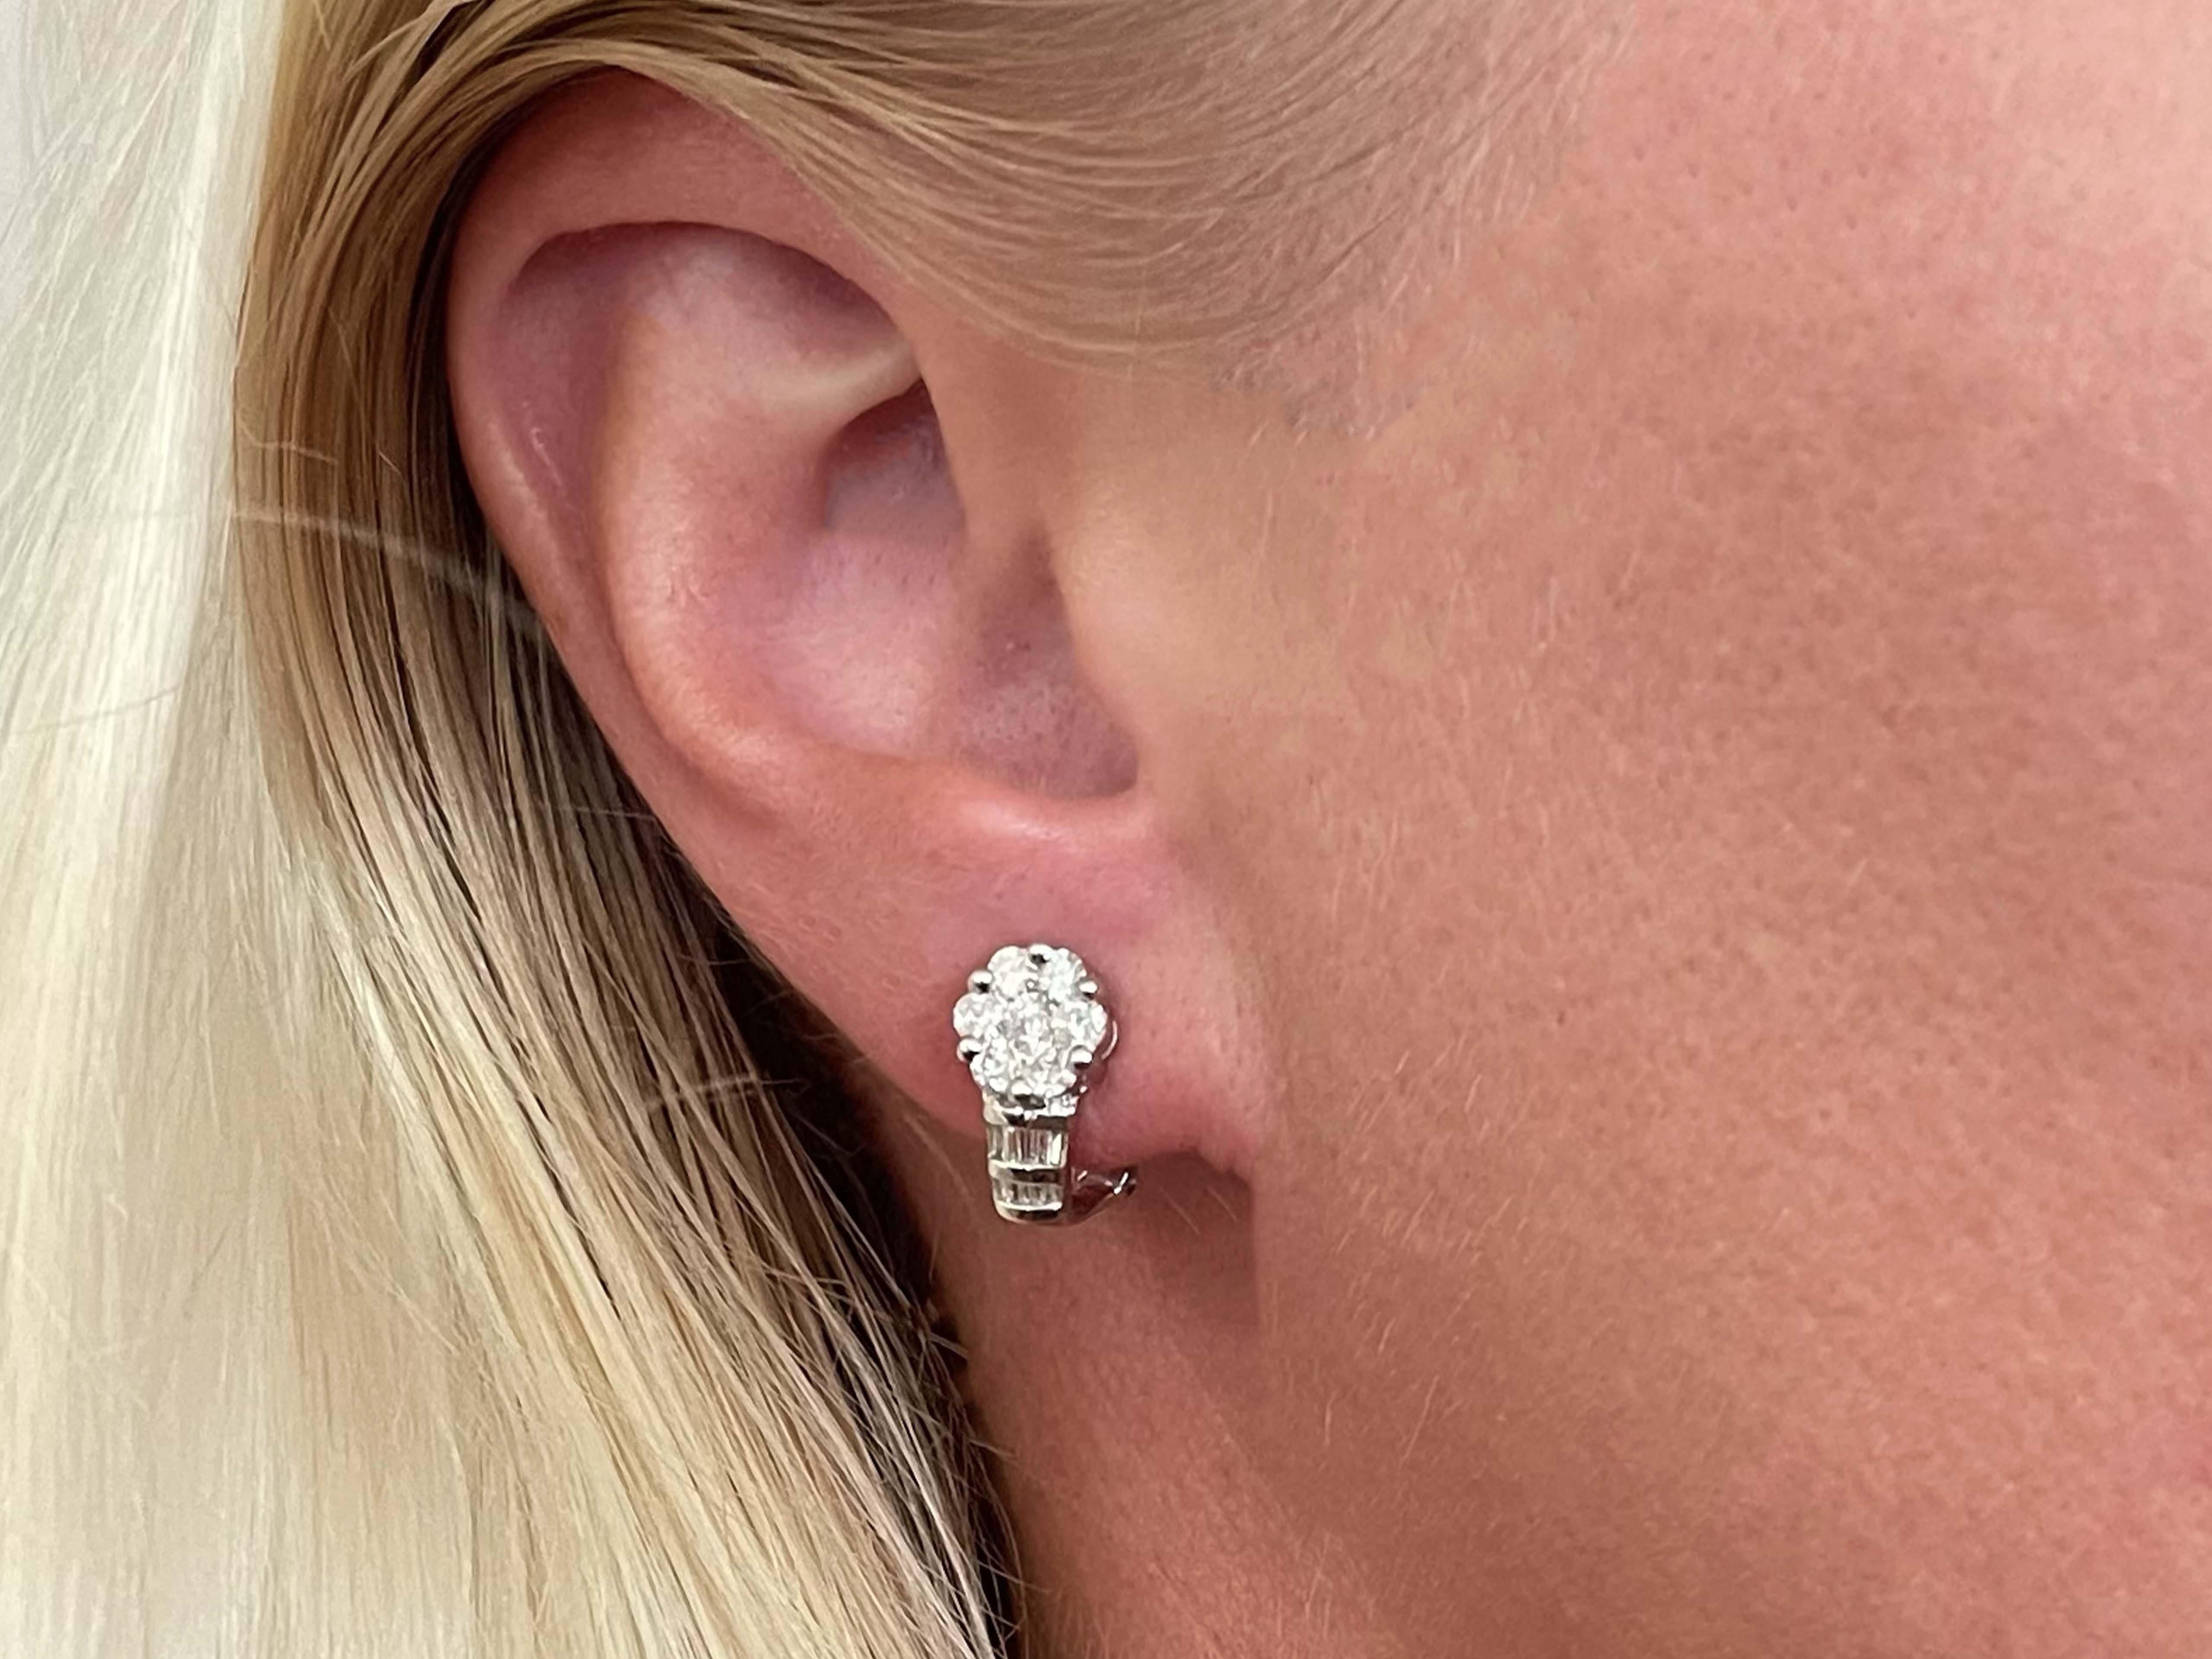 Earrings Specifications:

Metal: 14k White Gold

Total Weight: 3.8 Grams

Earring Measurements: 14.9 mm long x 7.7 wide

​​Diamond Count: 14 Round brilliant , 18 baguettes
Diamond Setting: Prong and channel
Diamond Color: G-H

Diamond Clarity: